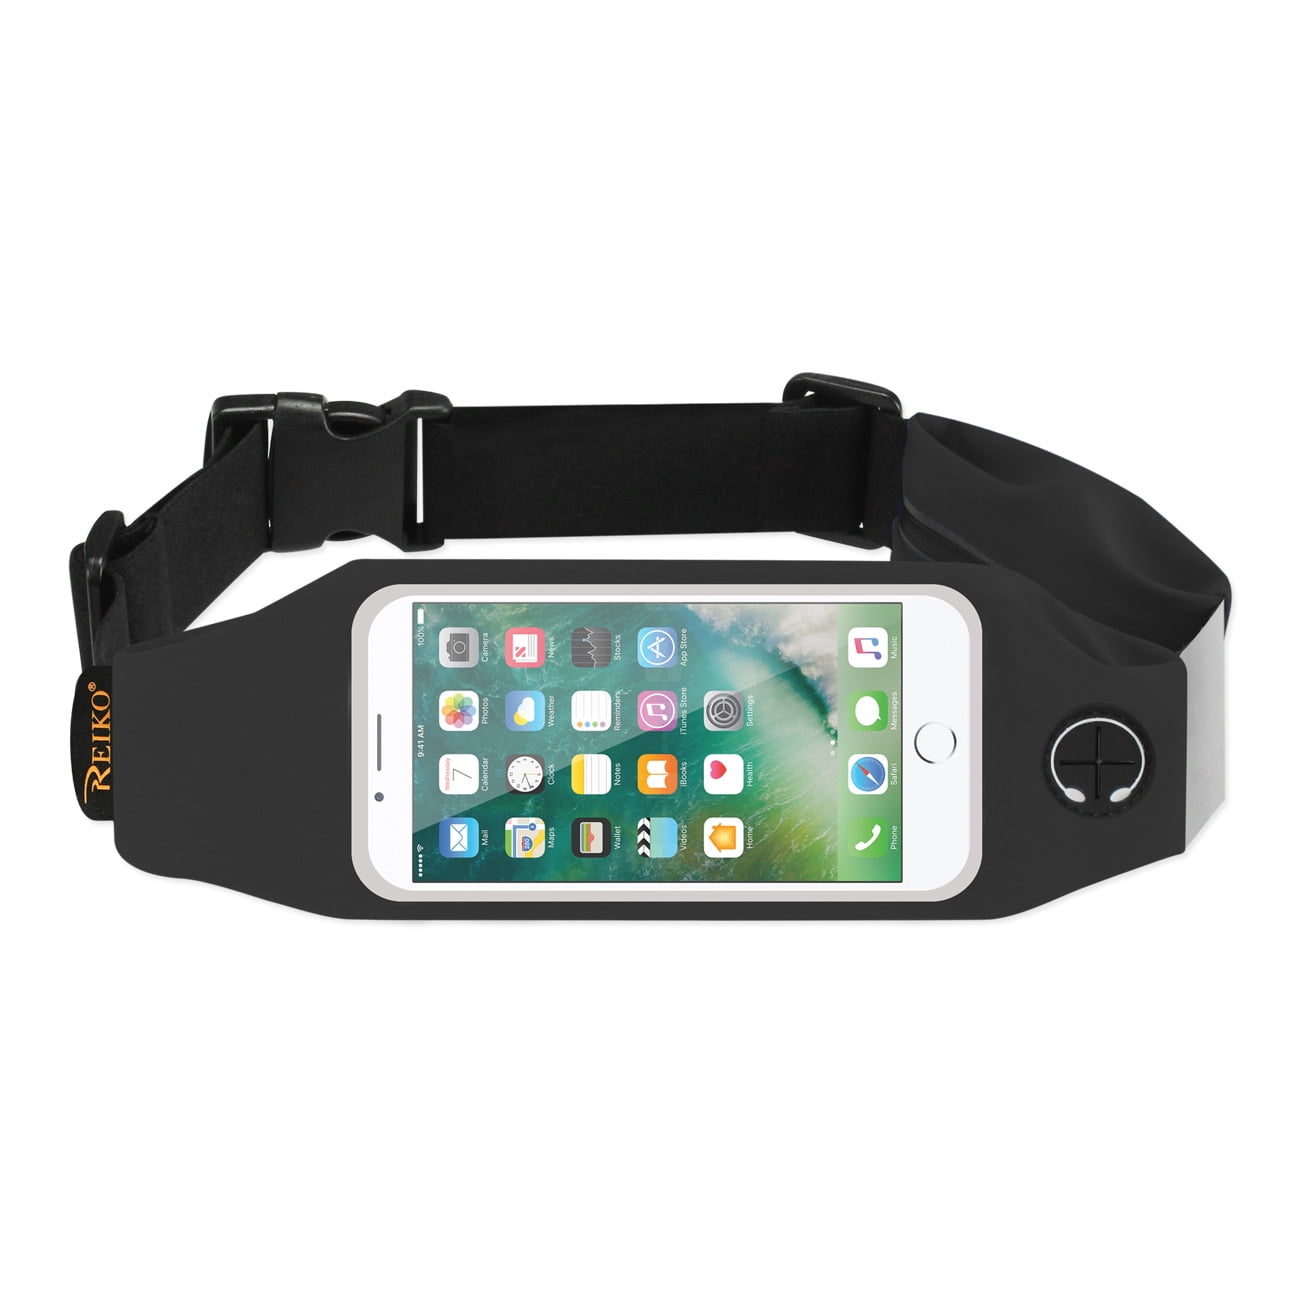 visueel Mens Vijftig Running Sport Belt For Iphone 7/ 6/ 6s Or 5 Inches Device With Two Pockets  In Black (5x5 Inches) - Walmart.com